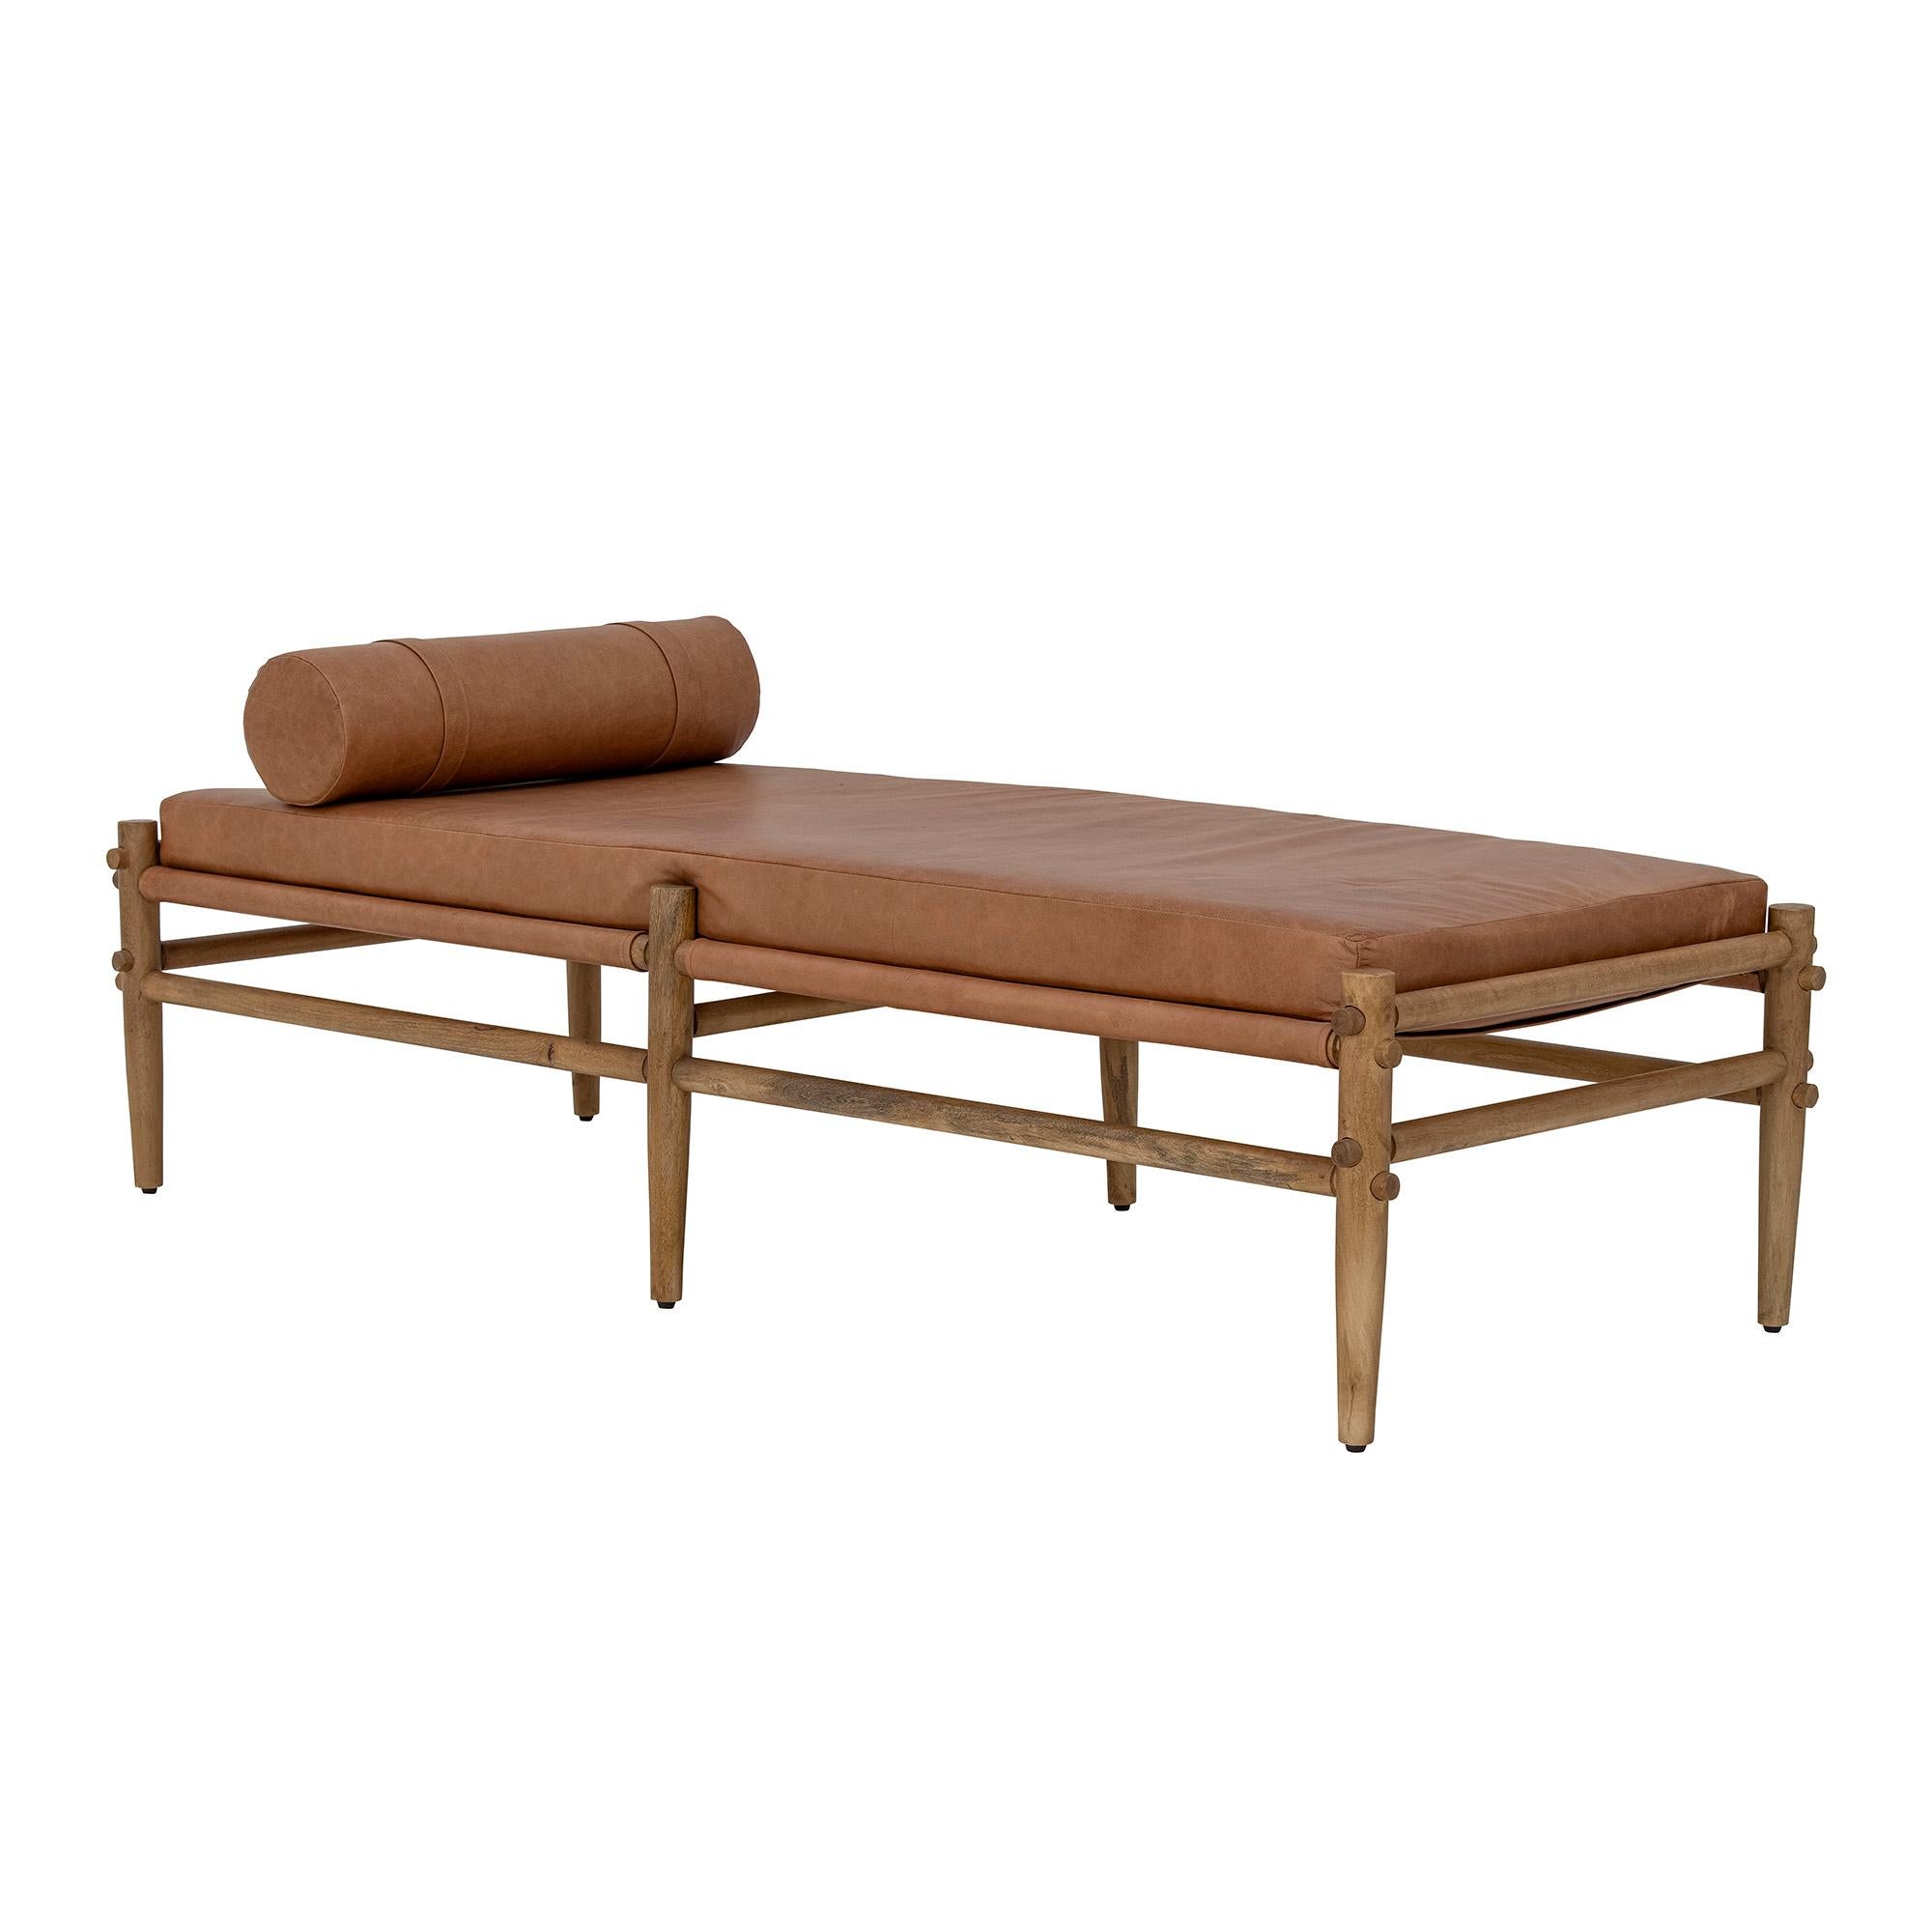 Meridienne daybed Aysa in buffalo leather and mango wood,  this beautiful, exclusive and classic piece of furniture in of high quality materials. Over time, the leather will develop a natural and perfect patina.  Can be paired with the a matching